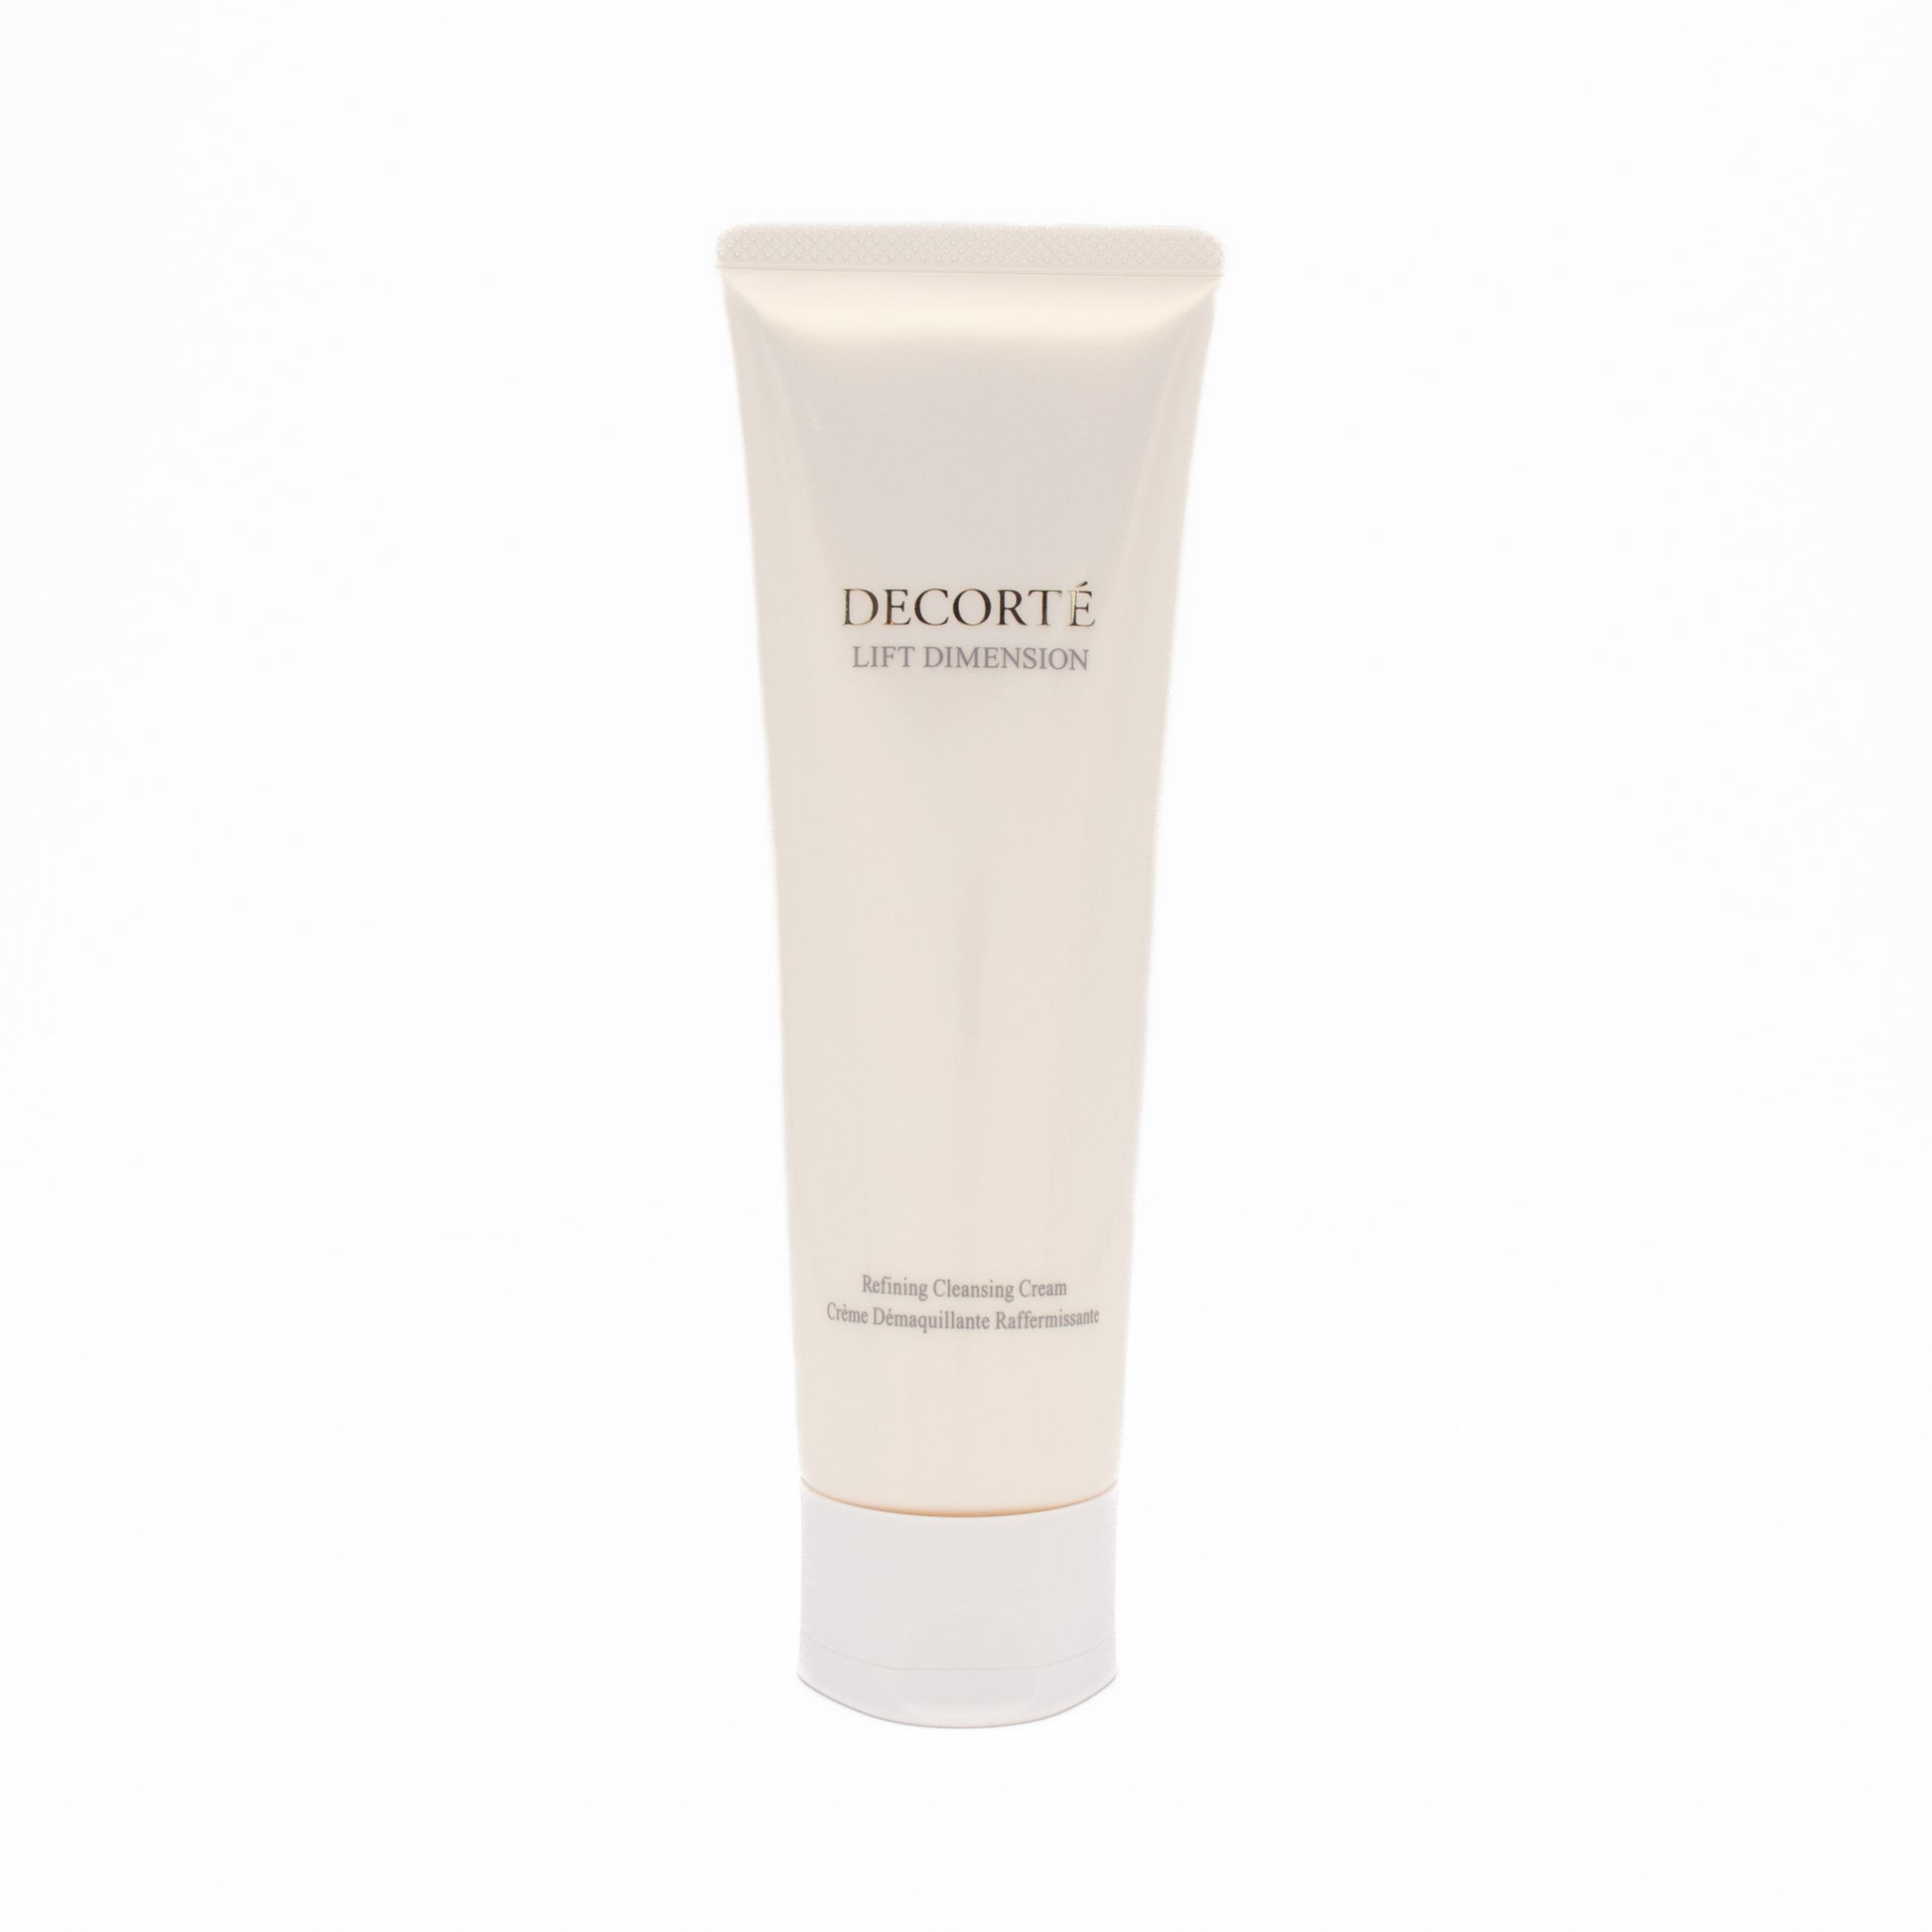 Decorte Lift Dimension Refining Cleansing Cream 134ml - Imperfect Box - This is Beauty UK